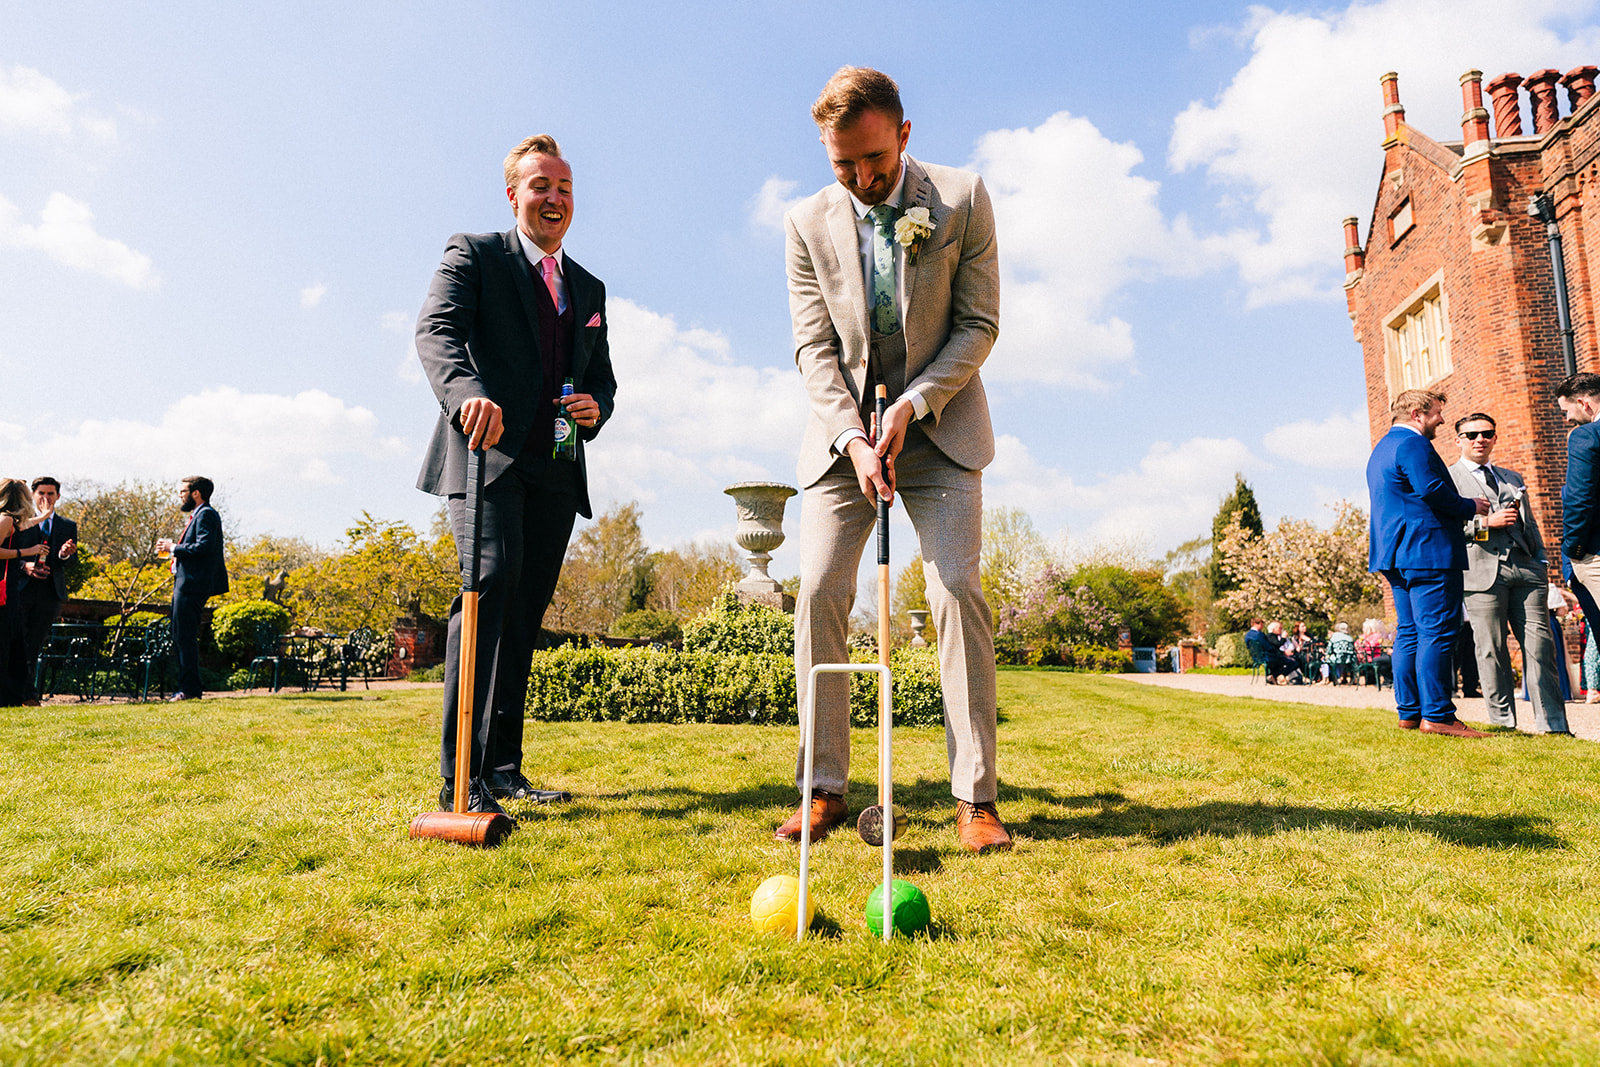 The wedding guests playing a game of croquet